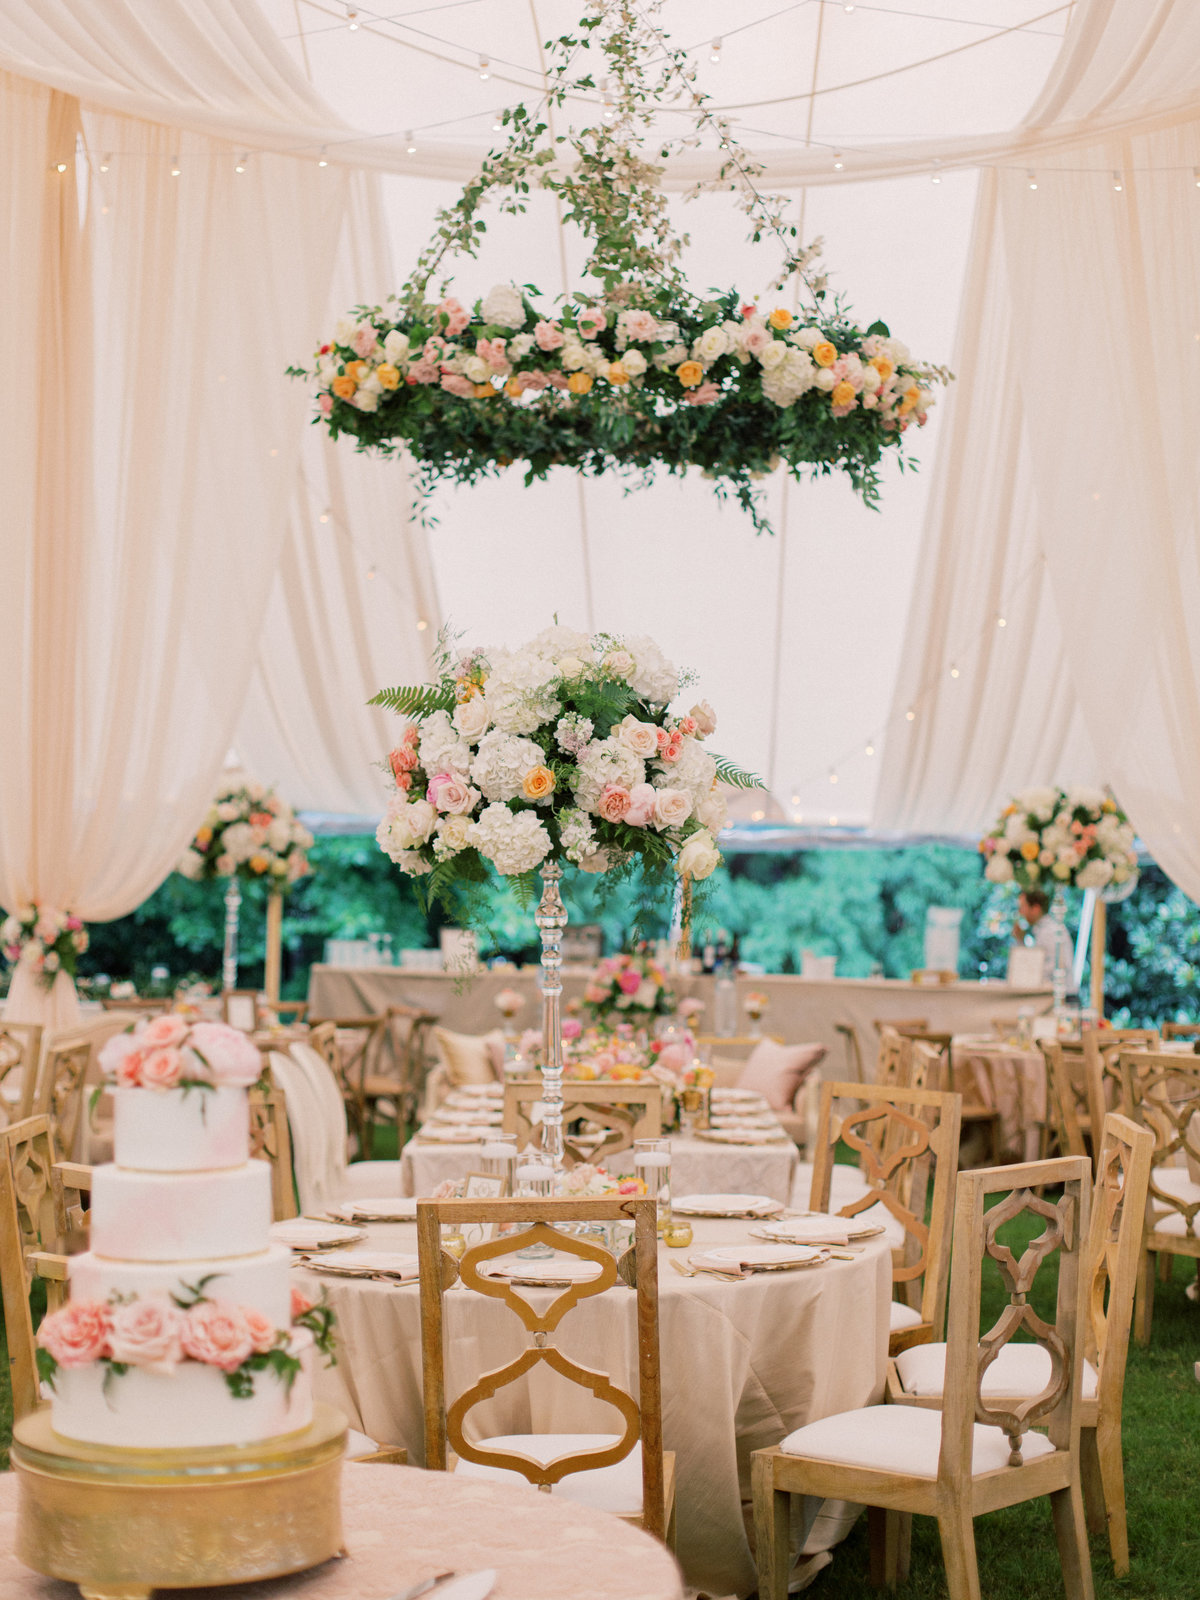 2019-06-08Carrie&MikeWedding-57